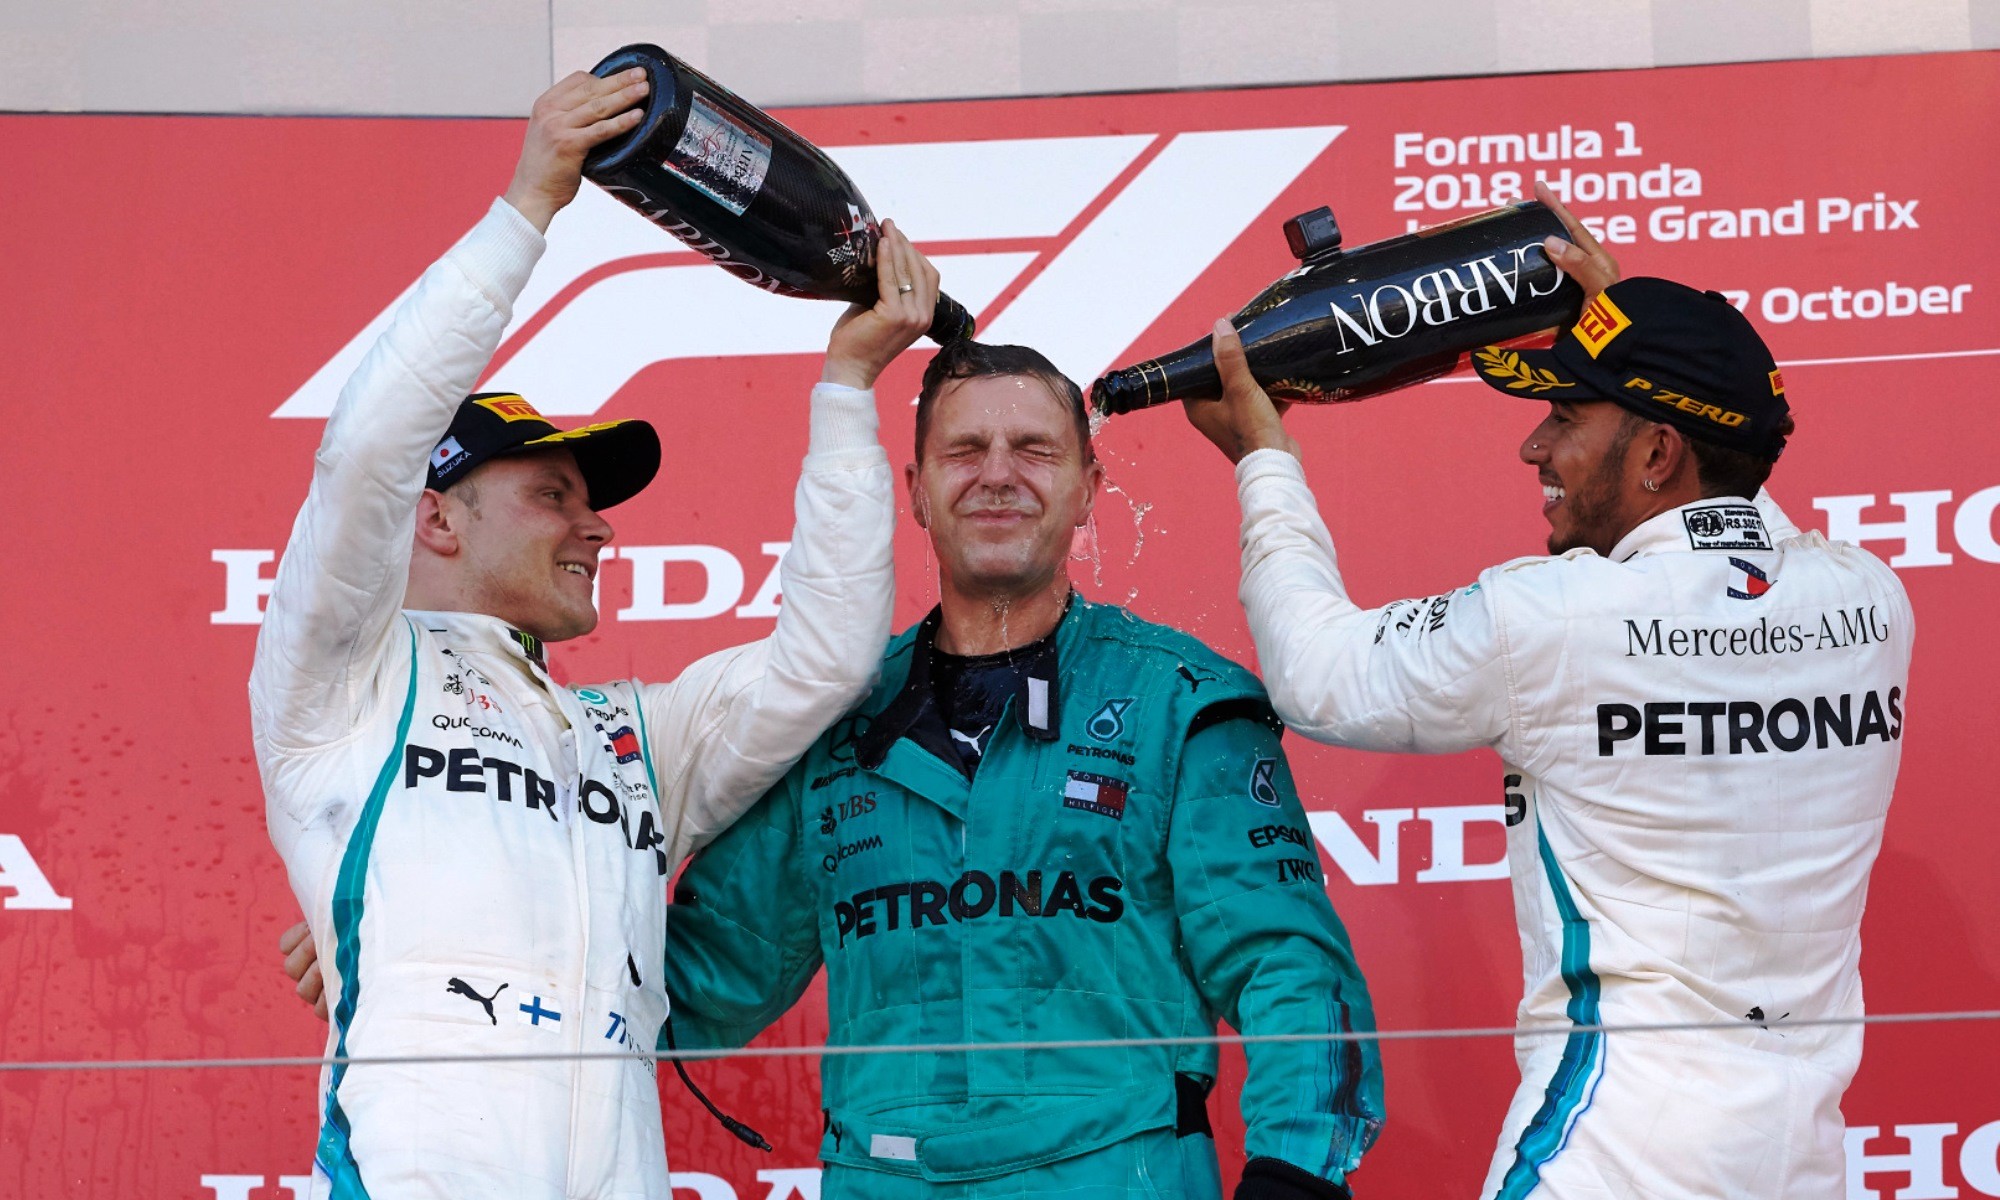 The drivers and engineer enjoy the podium celebrations